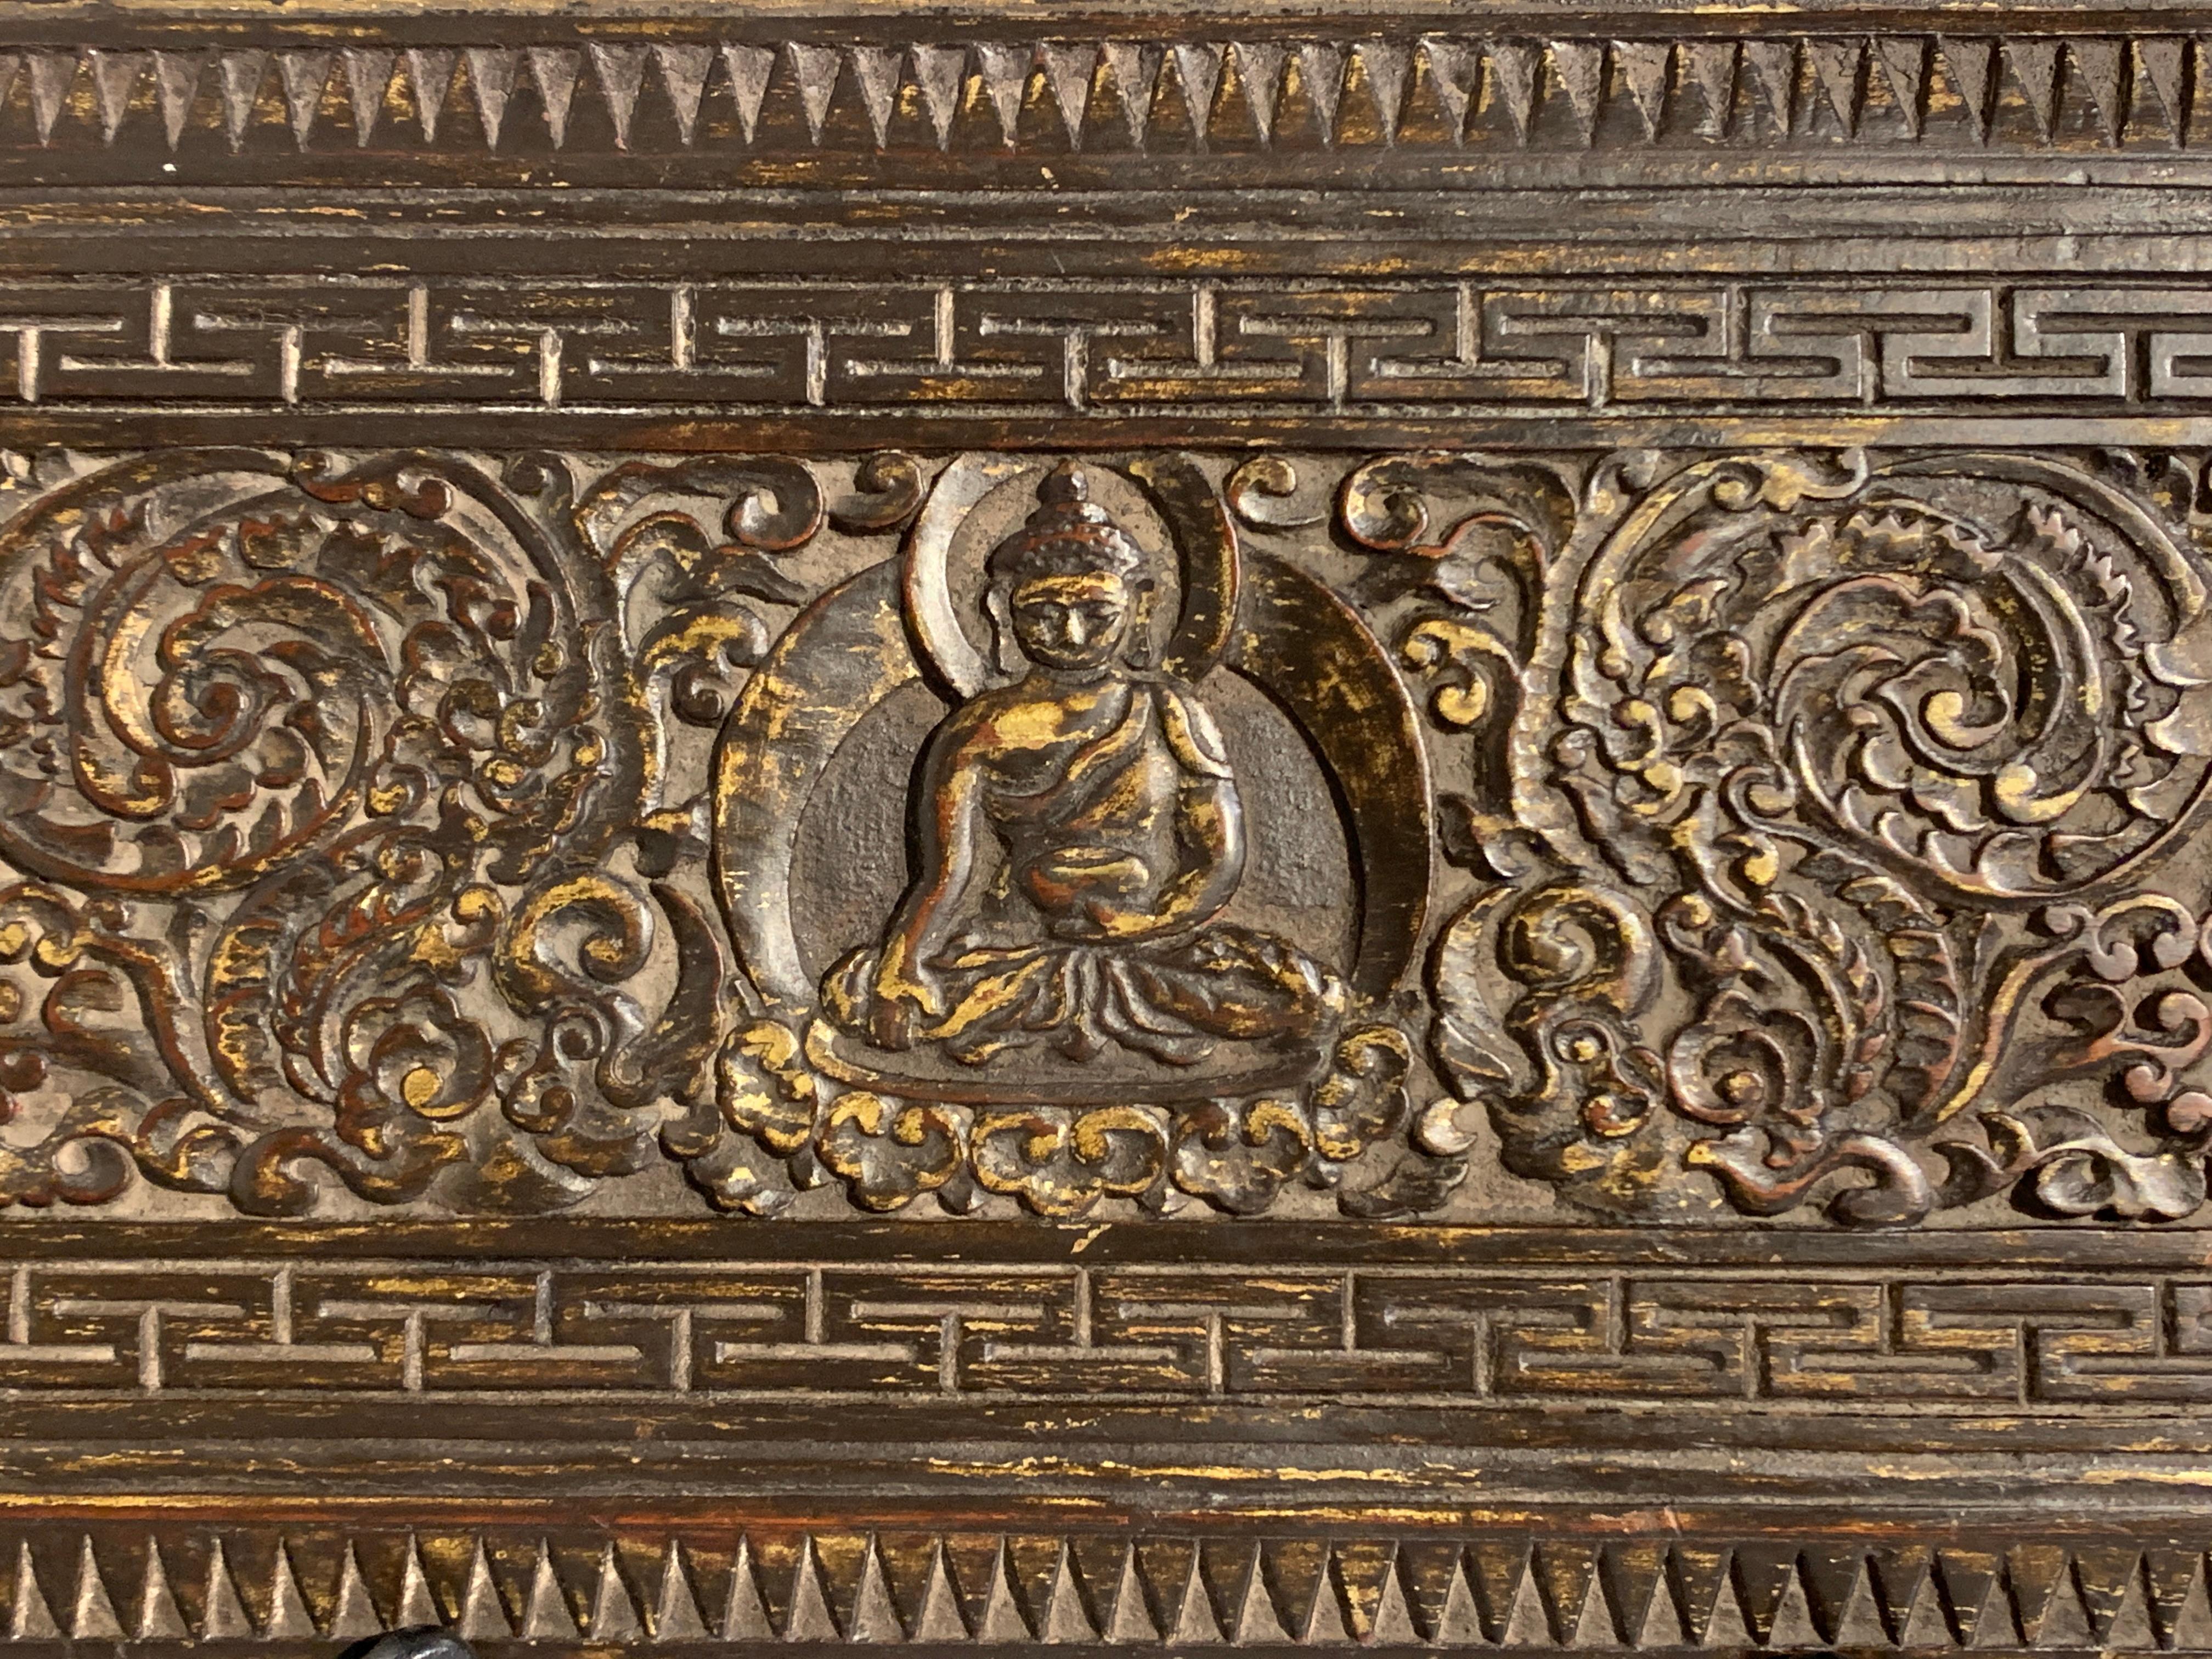 A fine and unusual wooden book or manuscript cover with a carved exterior and painted interior, 15th century, Nepal. 

The exterior of the manuscript cover exuberantly carved with a figure of Shakyamuni, the Historical Buddha, to the center,